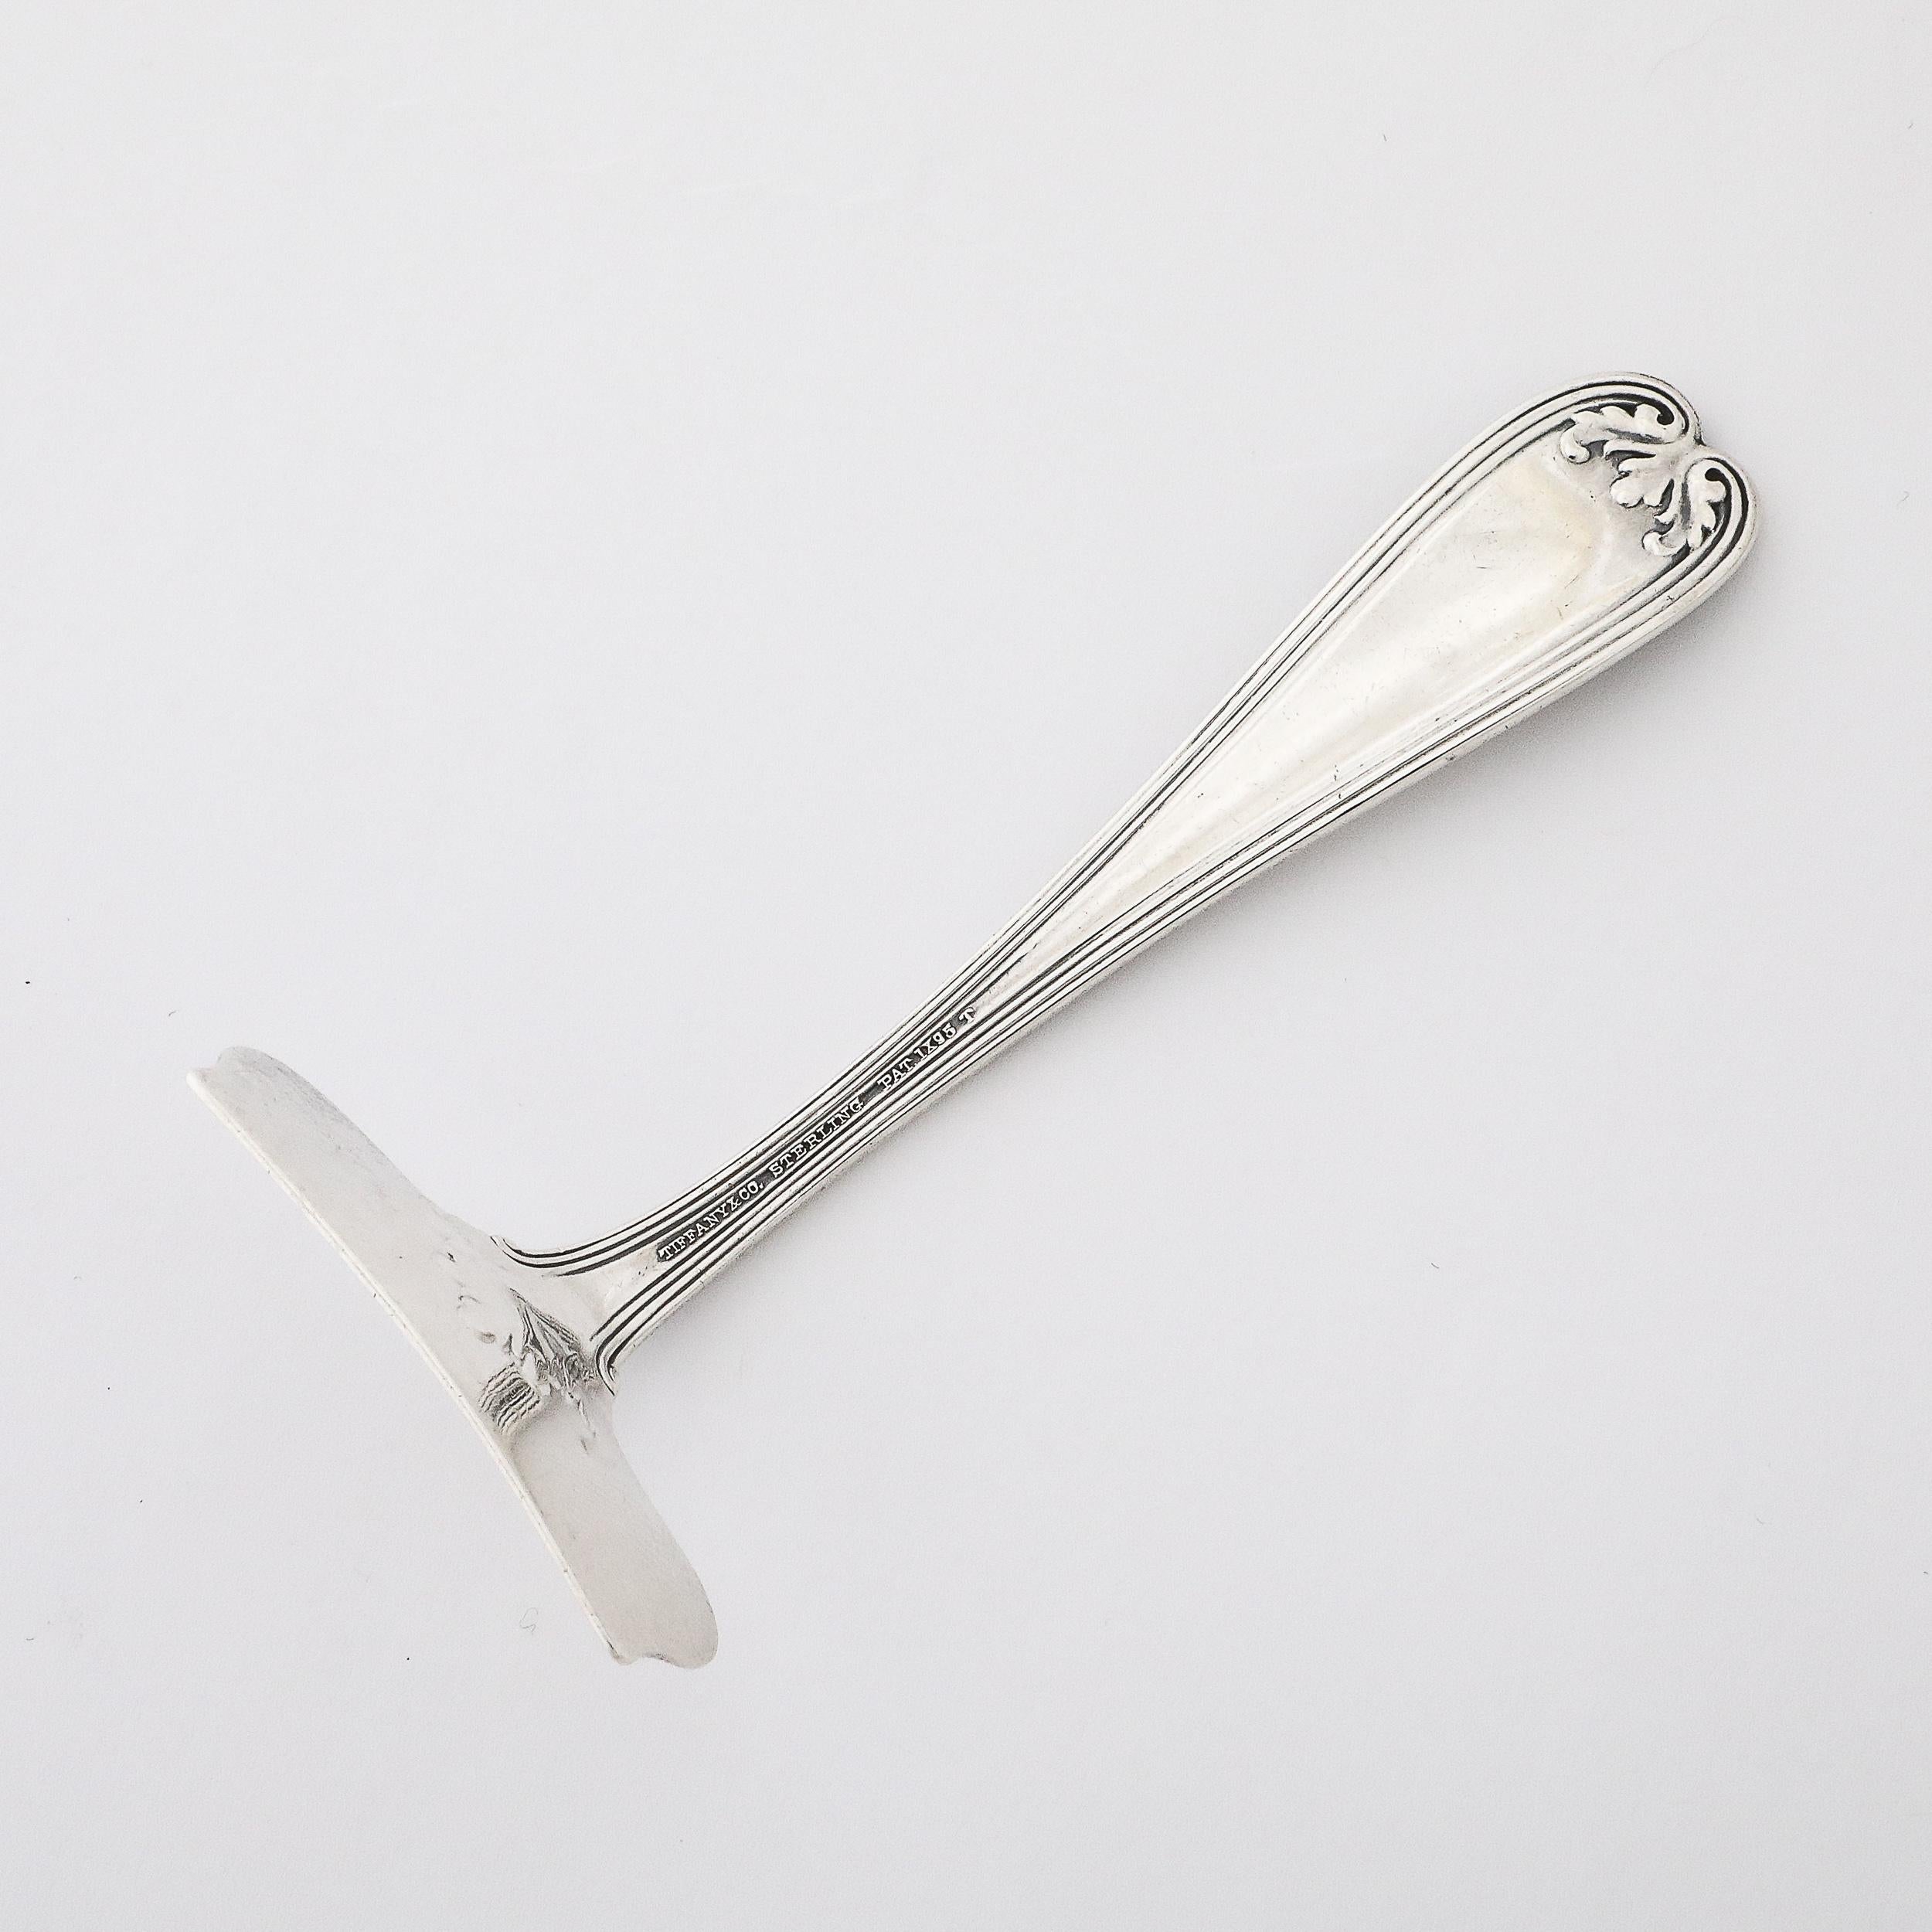 This lovely and beautifully formed Tiffany and Co.19th Century Sterling Silver Food Pusher Pat. IX95 T originates from the United States during the late 19th Century. A rare utensil originating from victorian society where it was considered rude for